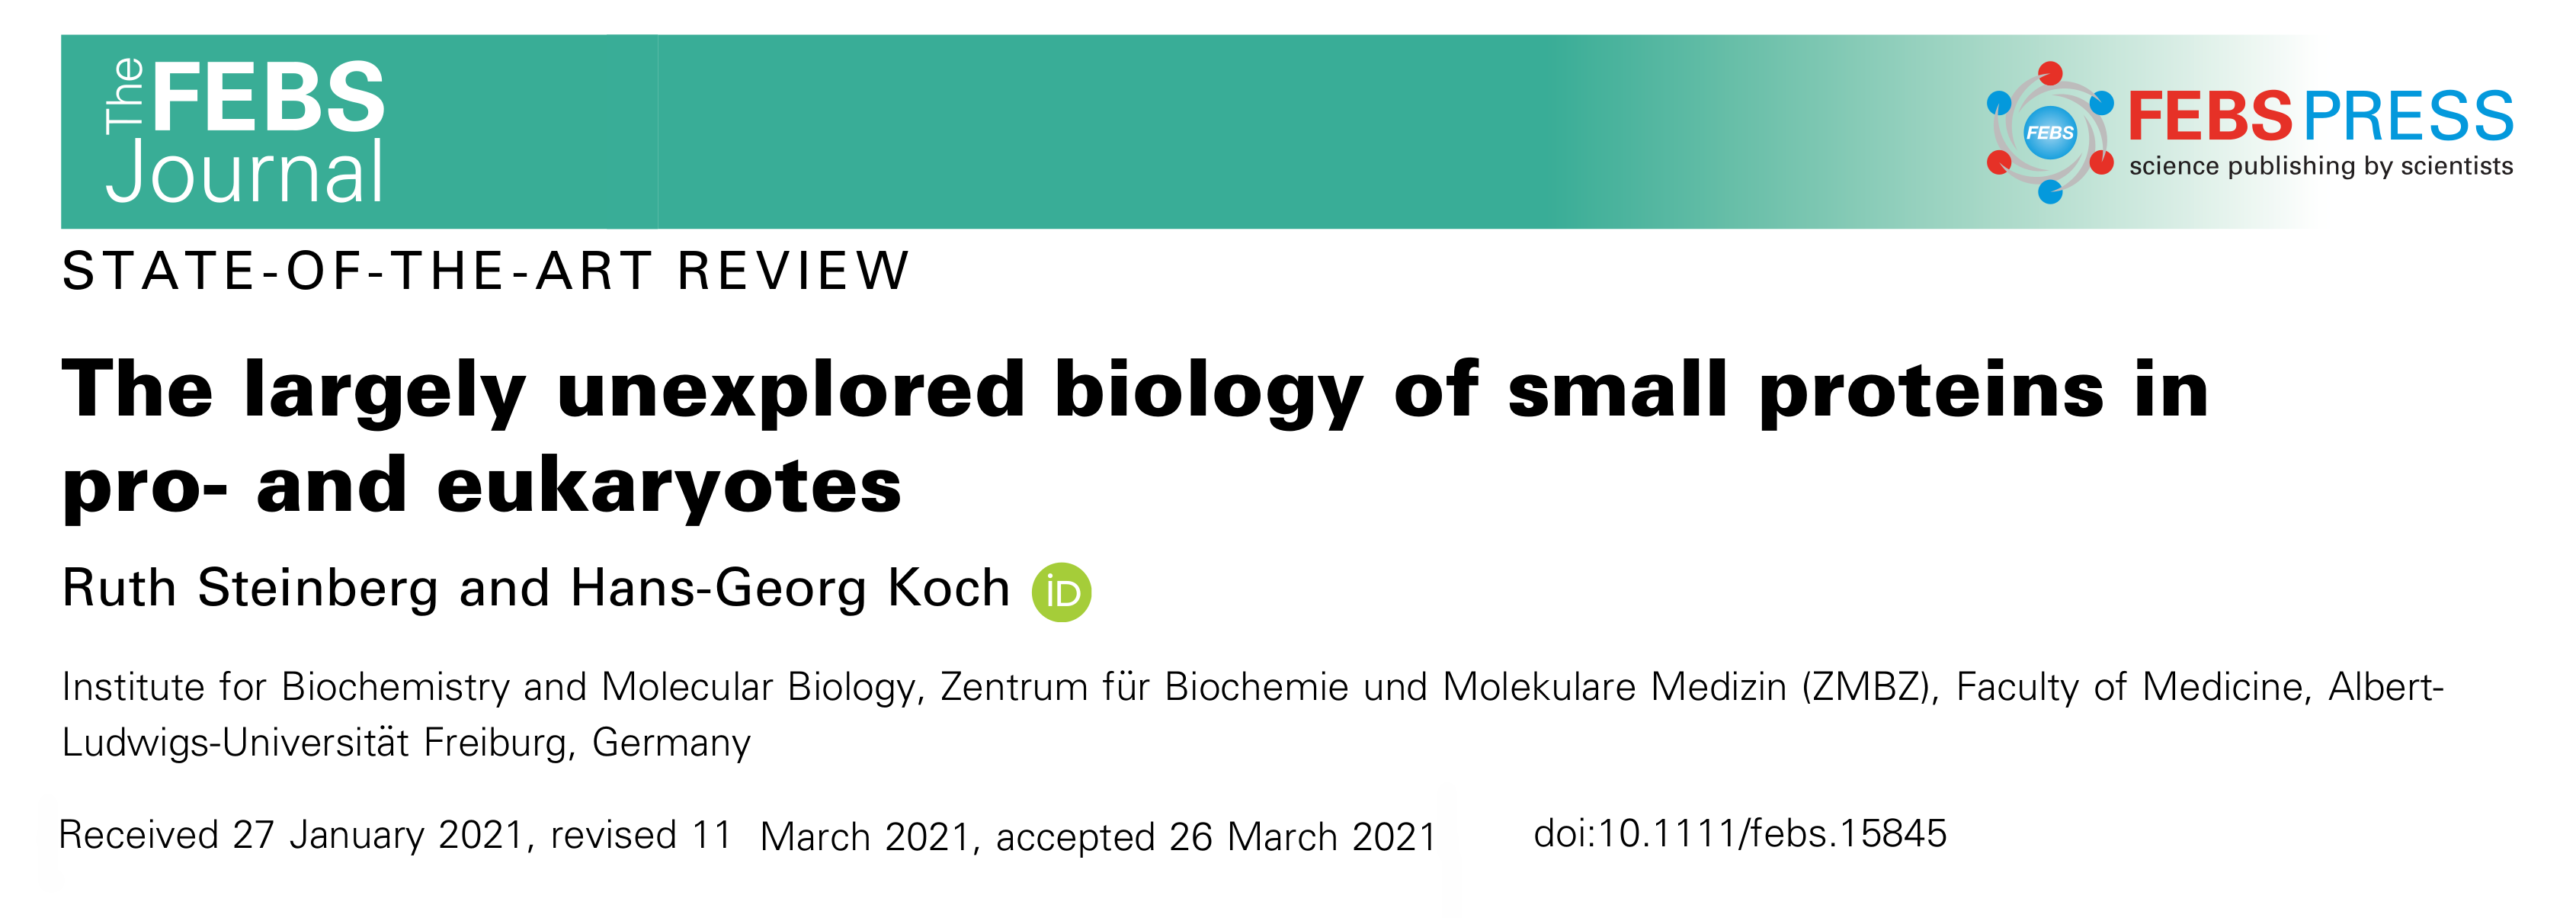 The large unexplored biology of small proteins in pro and eukaryotes.